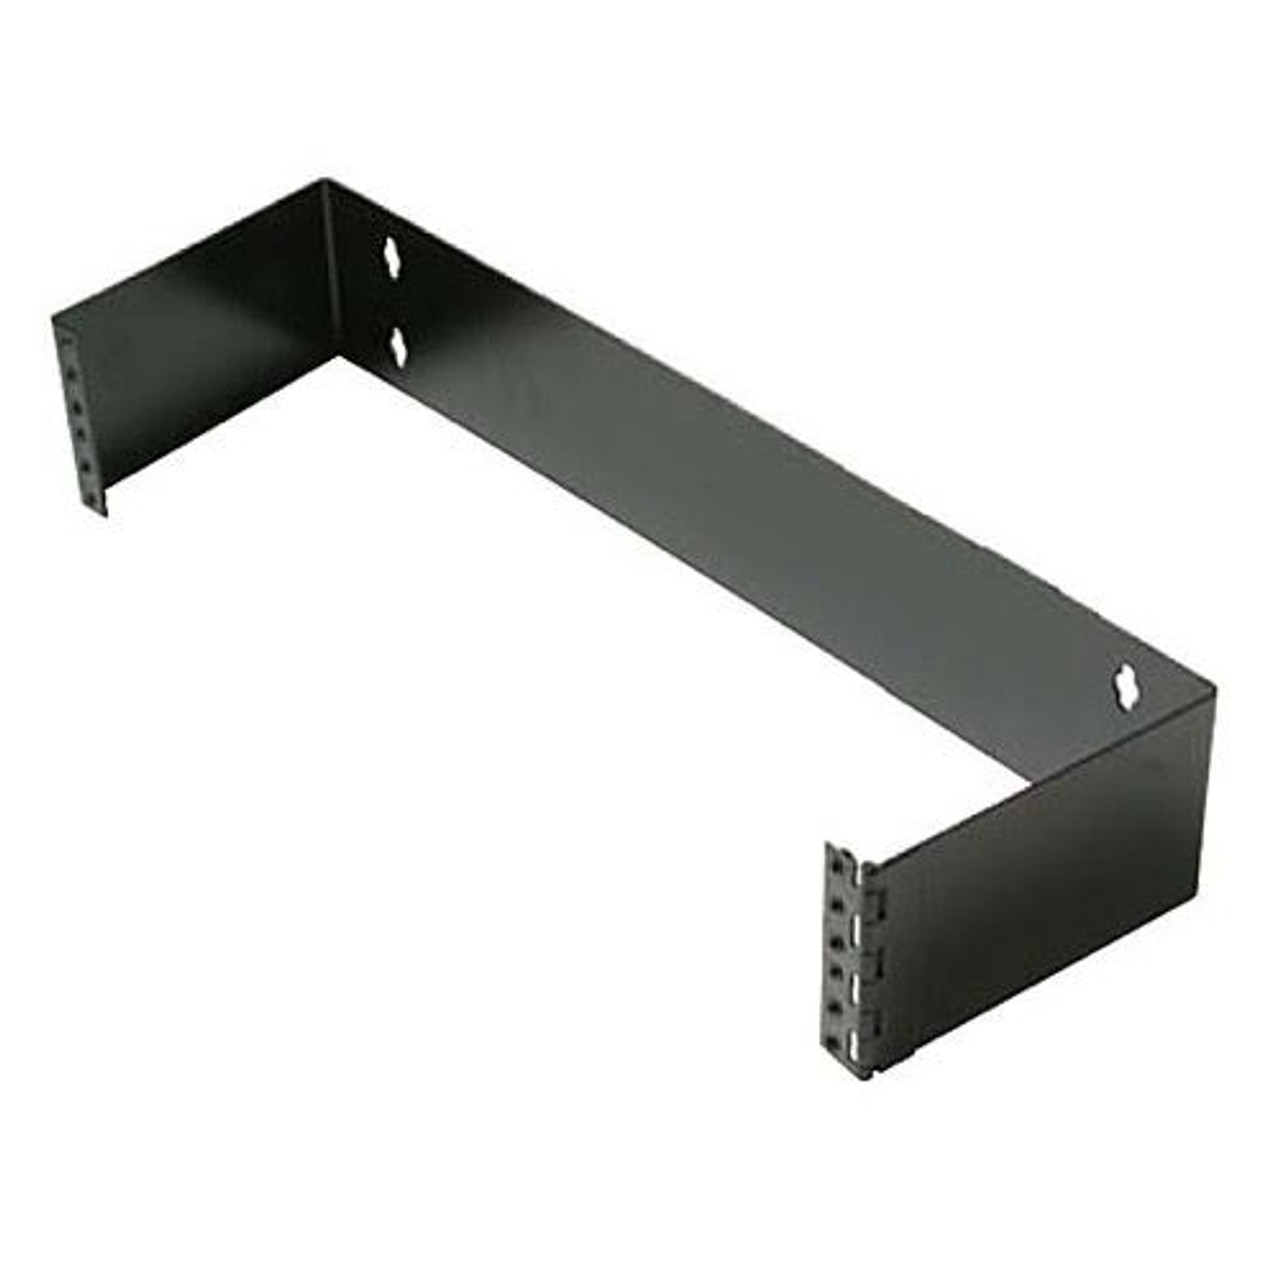 Eagle Patch Panel Wall Mount Bracket 19" Inch W x 3 1/2" H x 6" D Hinged 16 Gauge Black Powder Steel 2 x EIA 6" Depth Direct Wall Mount Bracket with Available Rear Component Access